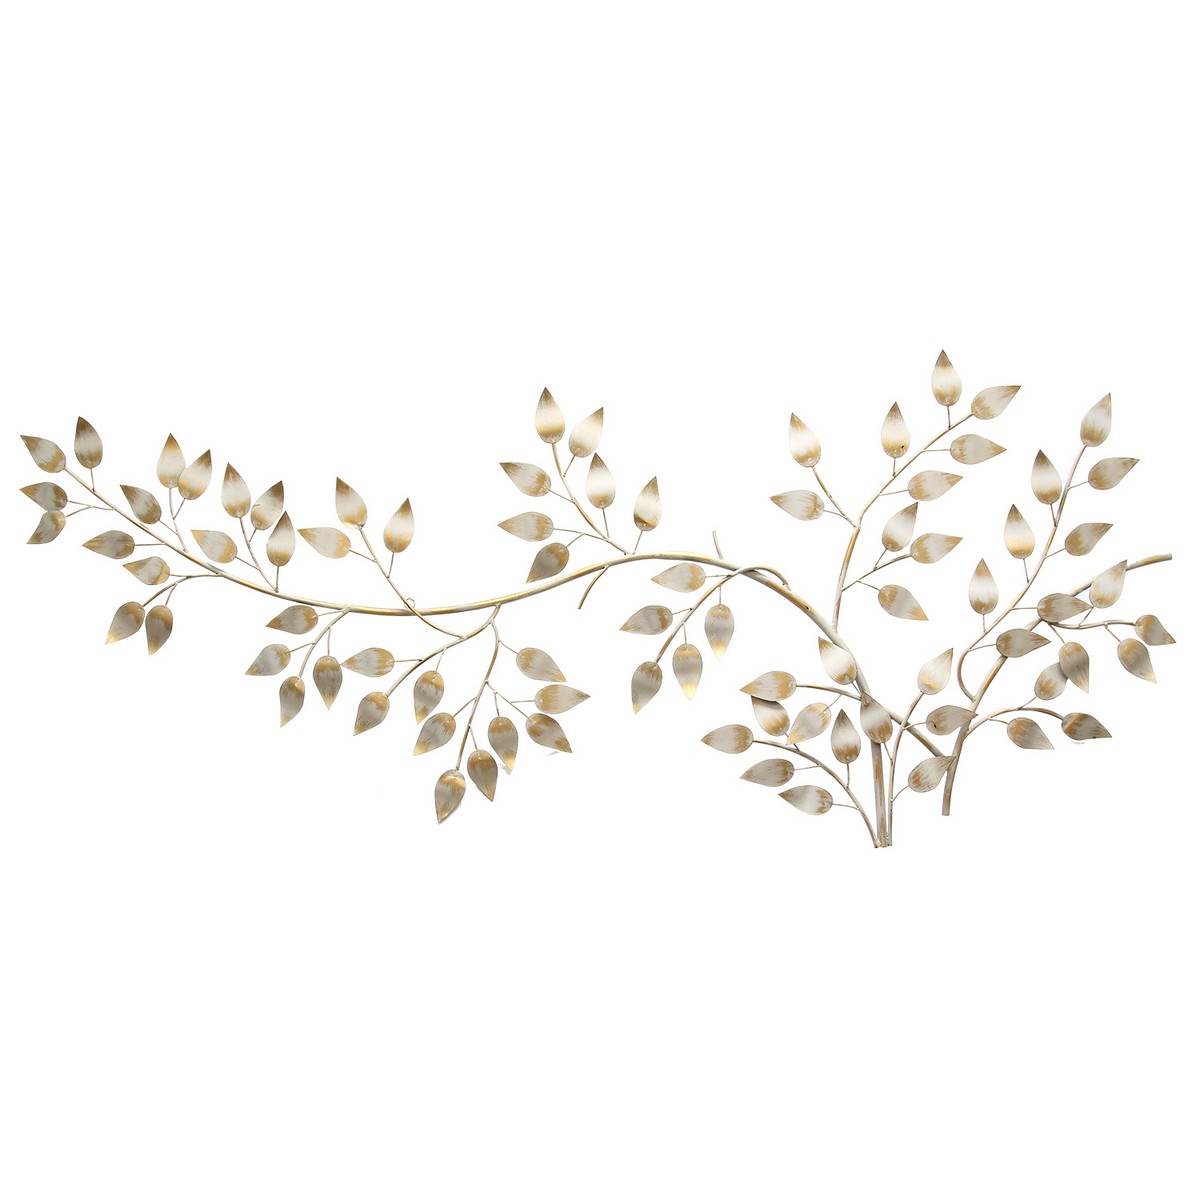 Stratton Home Decor Brushed Gold Flowing Leaves Wall Decor - Metallic Gold/White